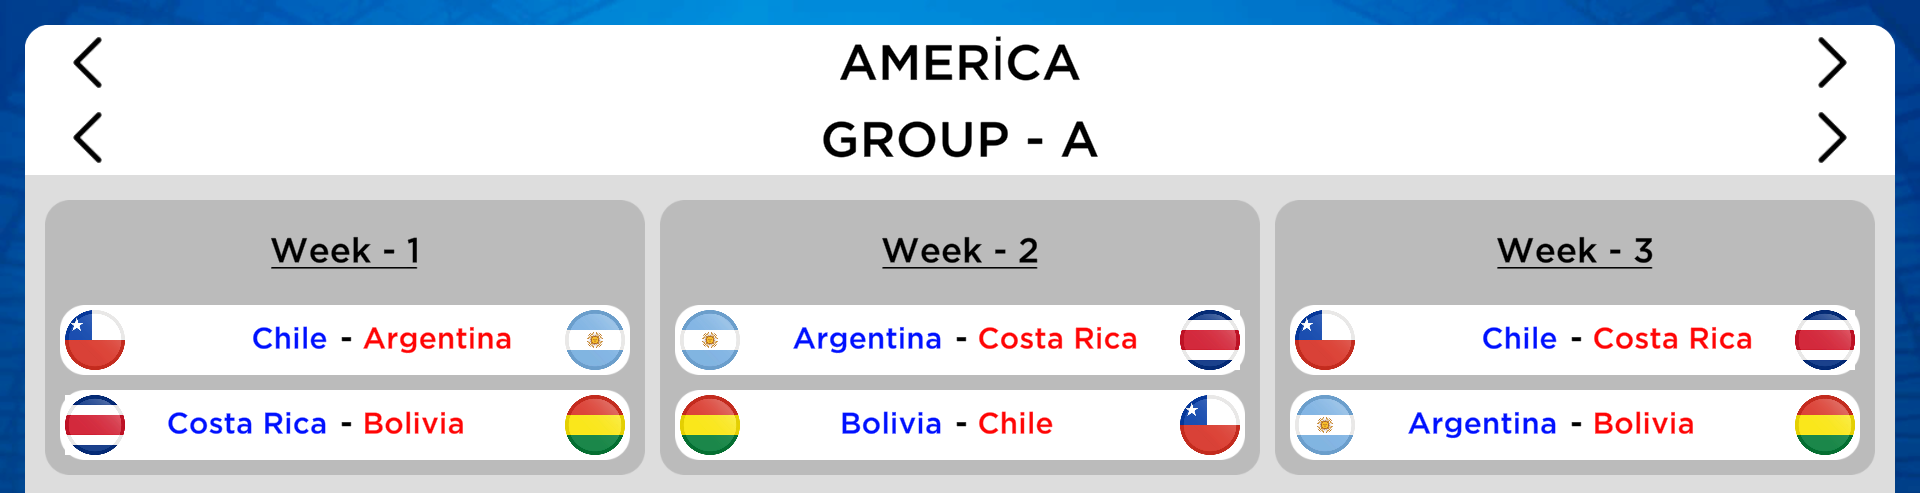 America - Fixture - Group A.png